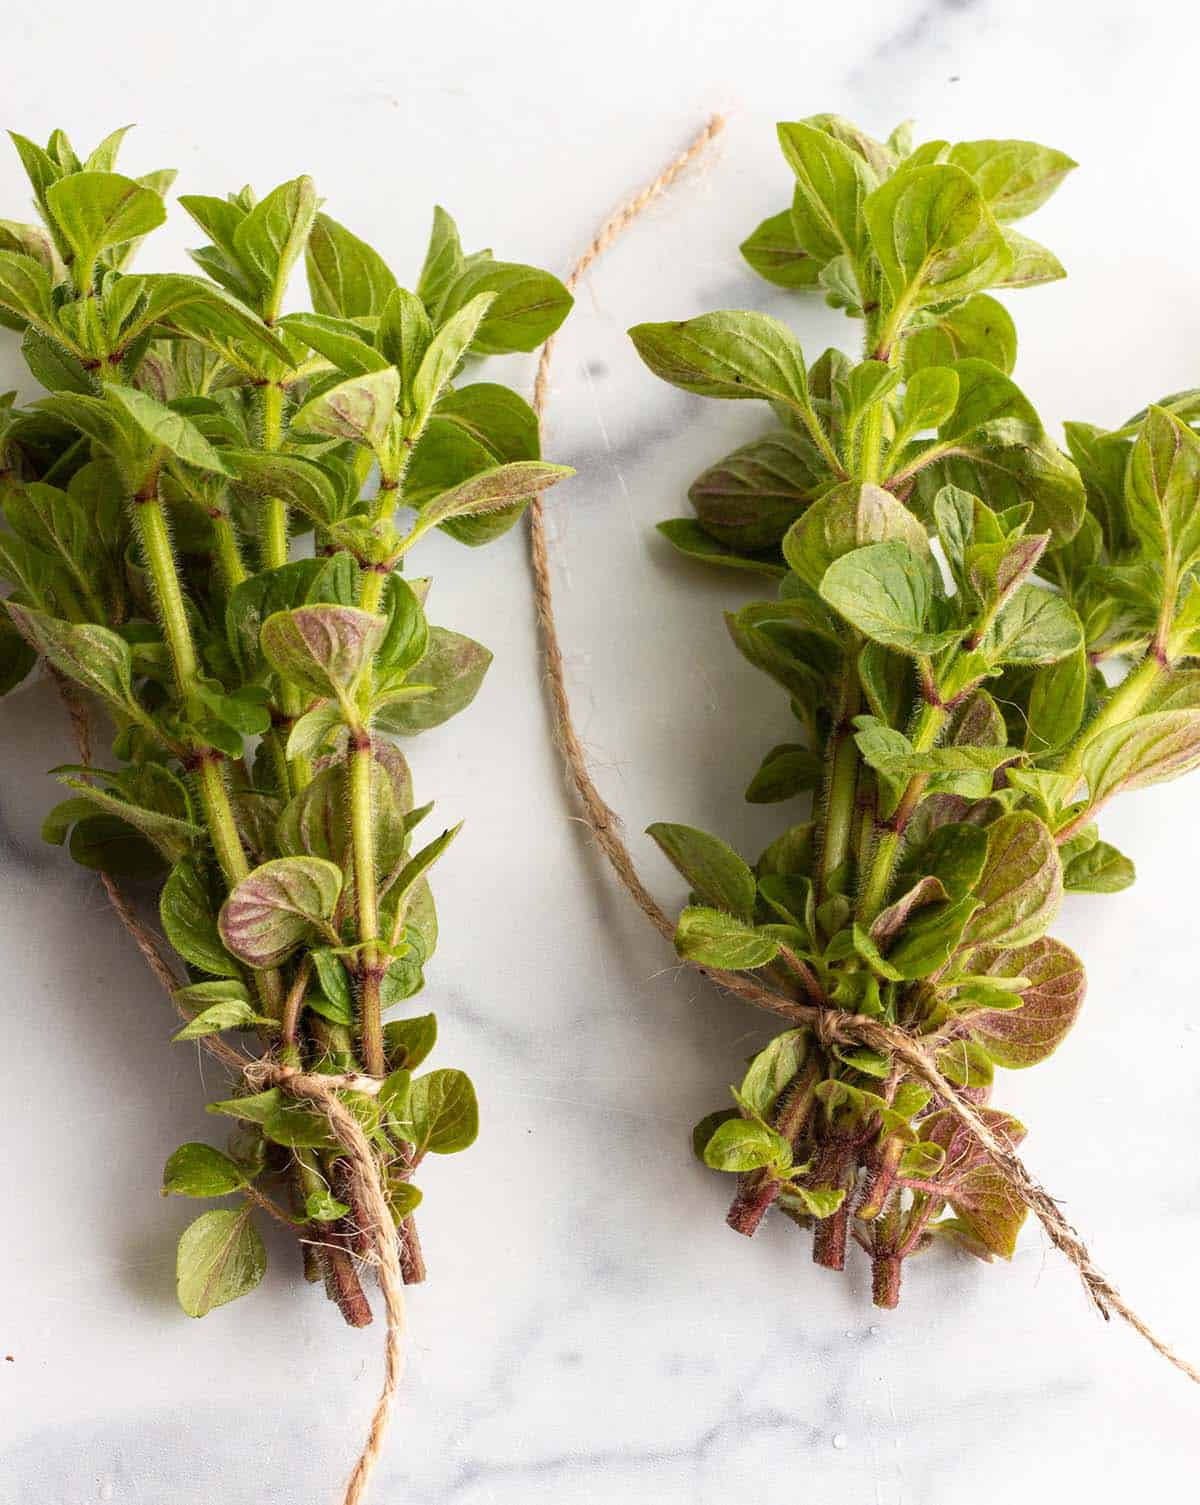 Sprigs of oregano tied together.